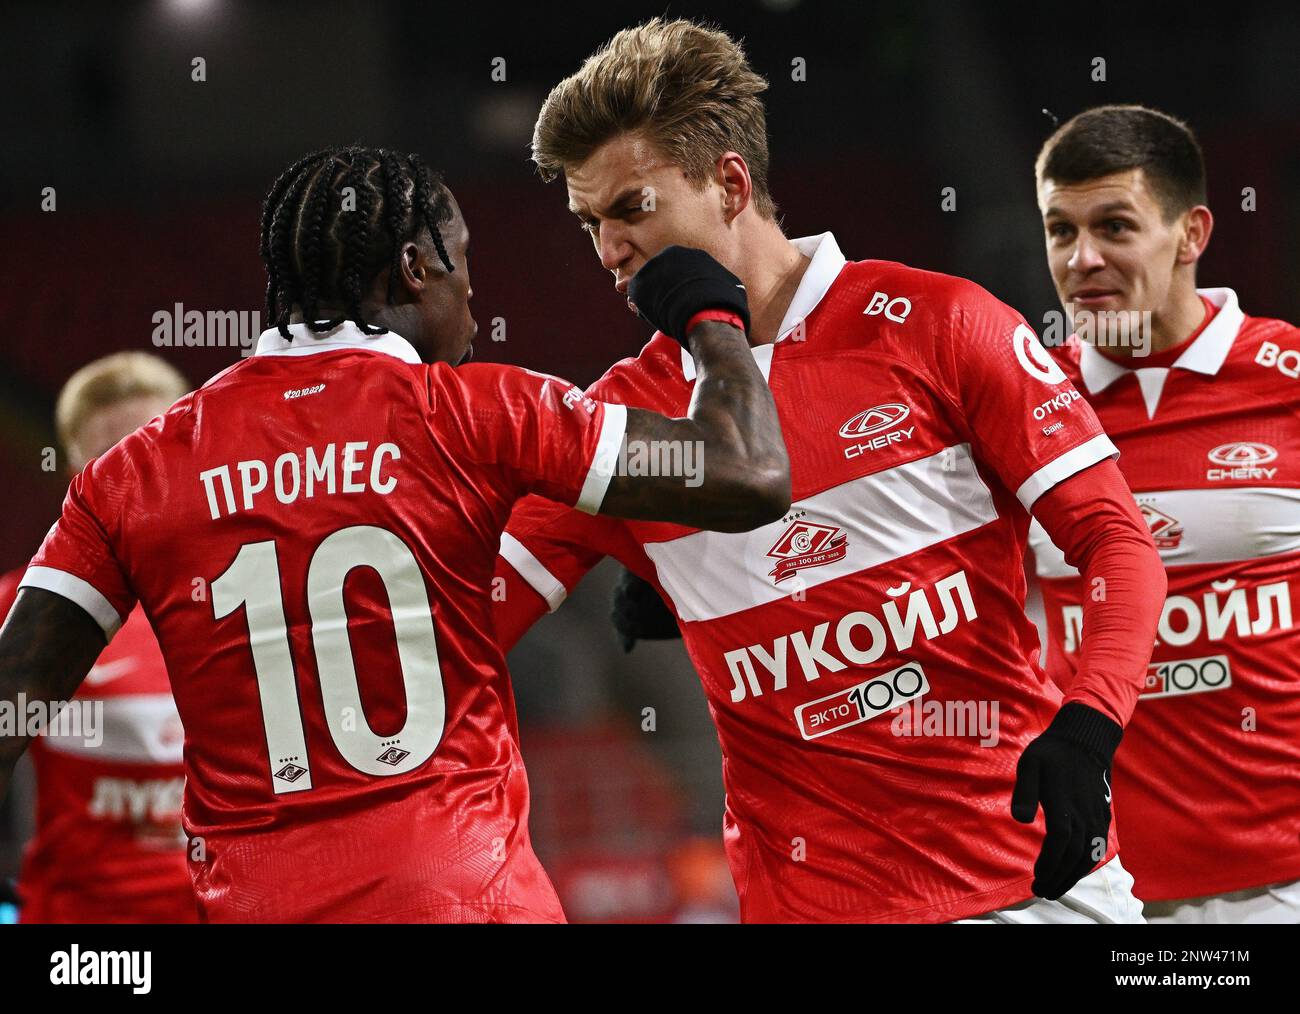 Fonbet - Russian Football Cup 2022/23. Match between the teams Spartak ( Moscow) - Lokomotiv (Moscow) at the stadium Opening Arena. From left to  right: Spartak team players Quincy Promes, Mikhail Ignatov and